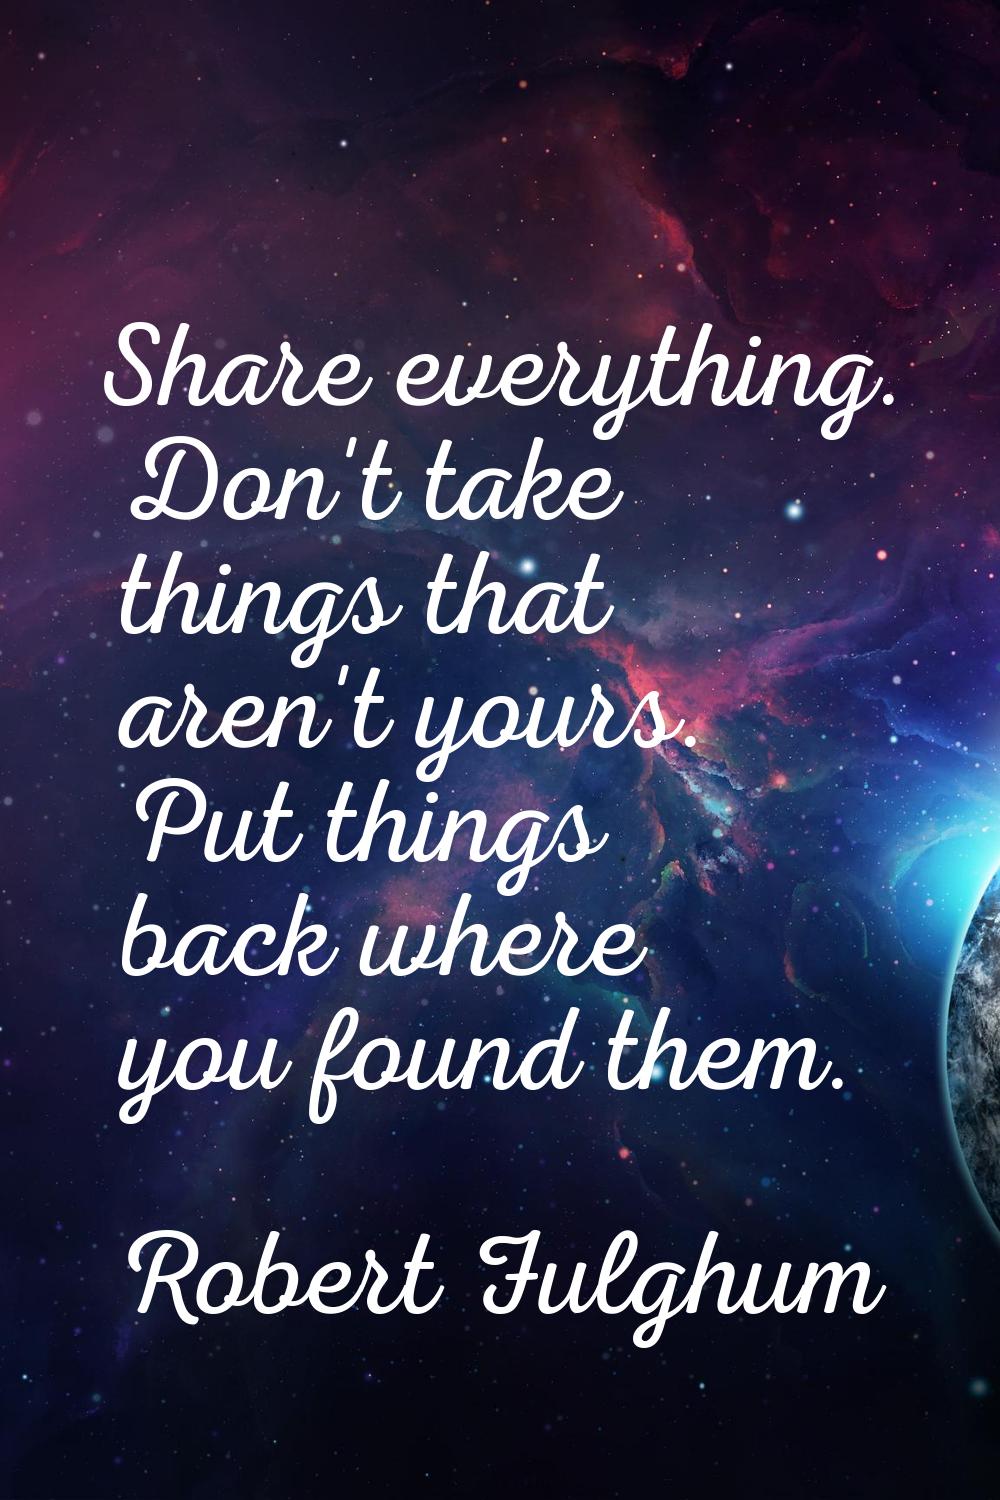 Share everything. Don't take things that aren't yours. Put things back where you found them.